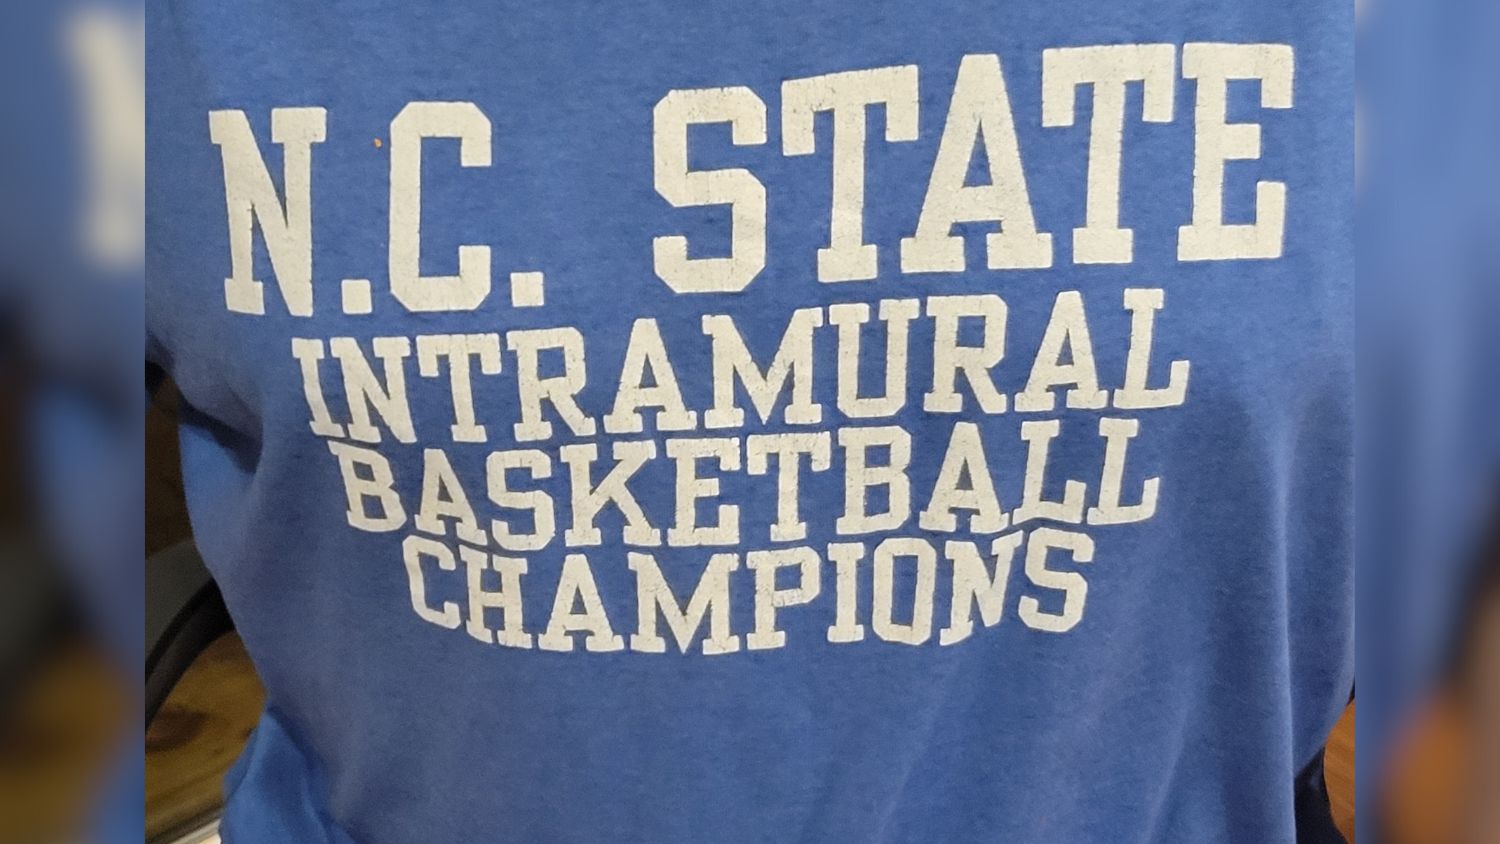 The first intramural sports t-shirt awarded